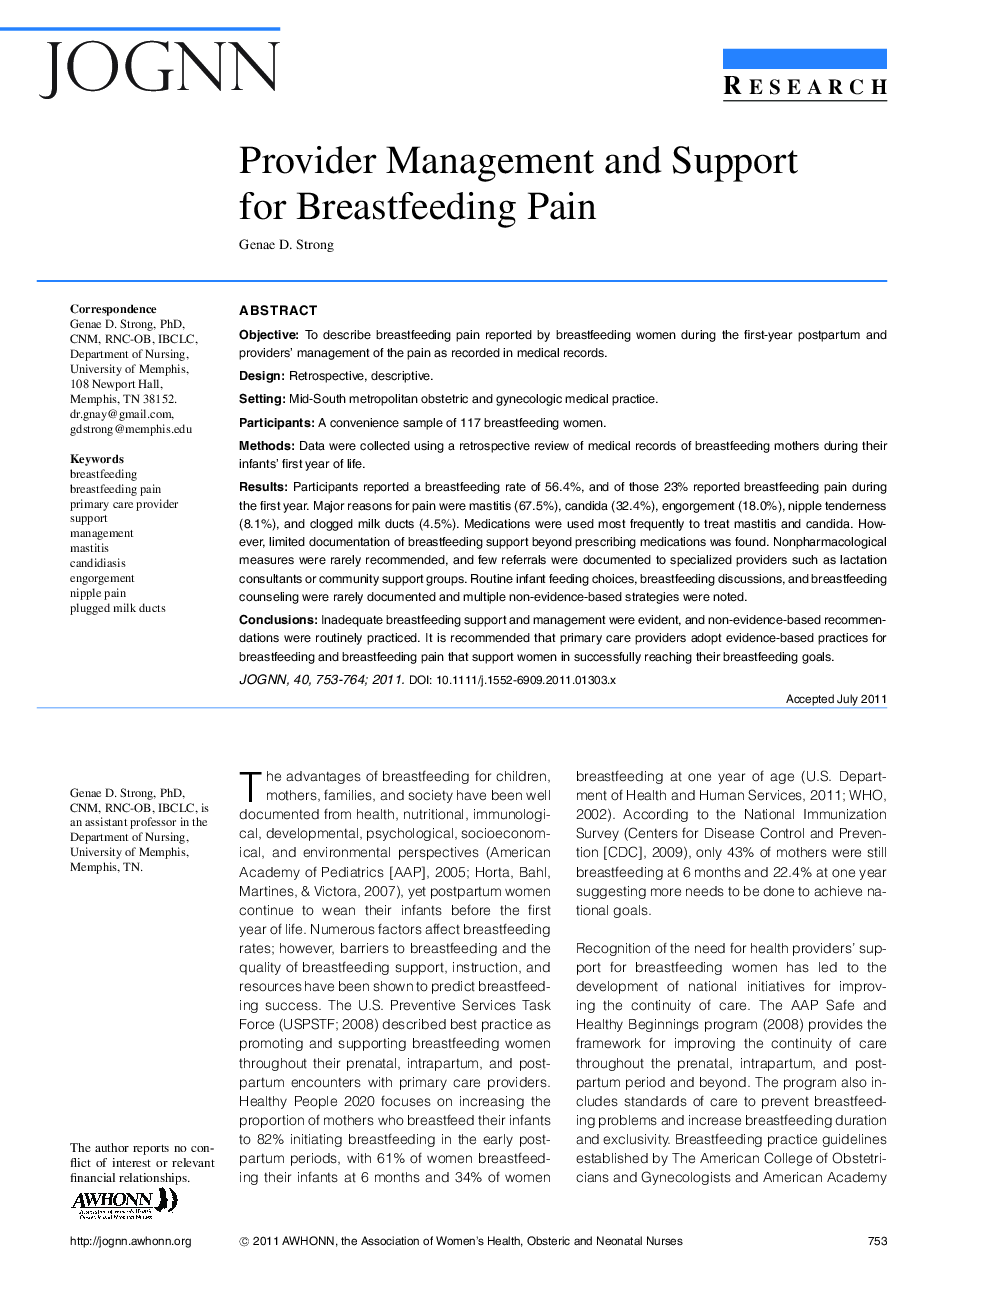 Provider Management and Support for Breastfeeding Pain